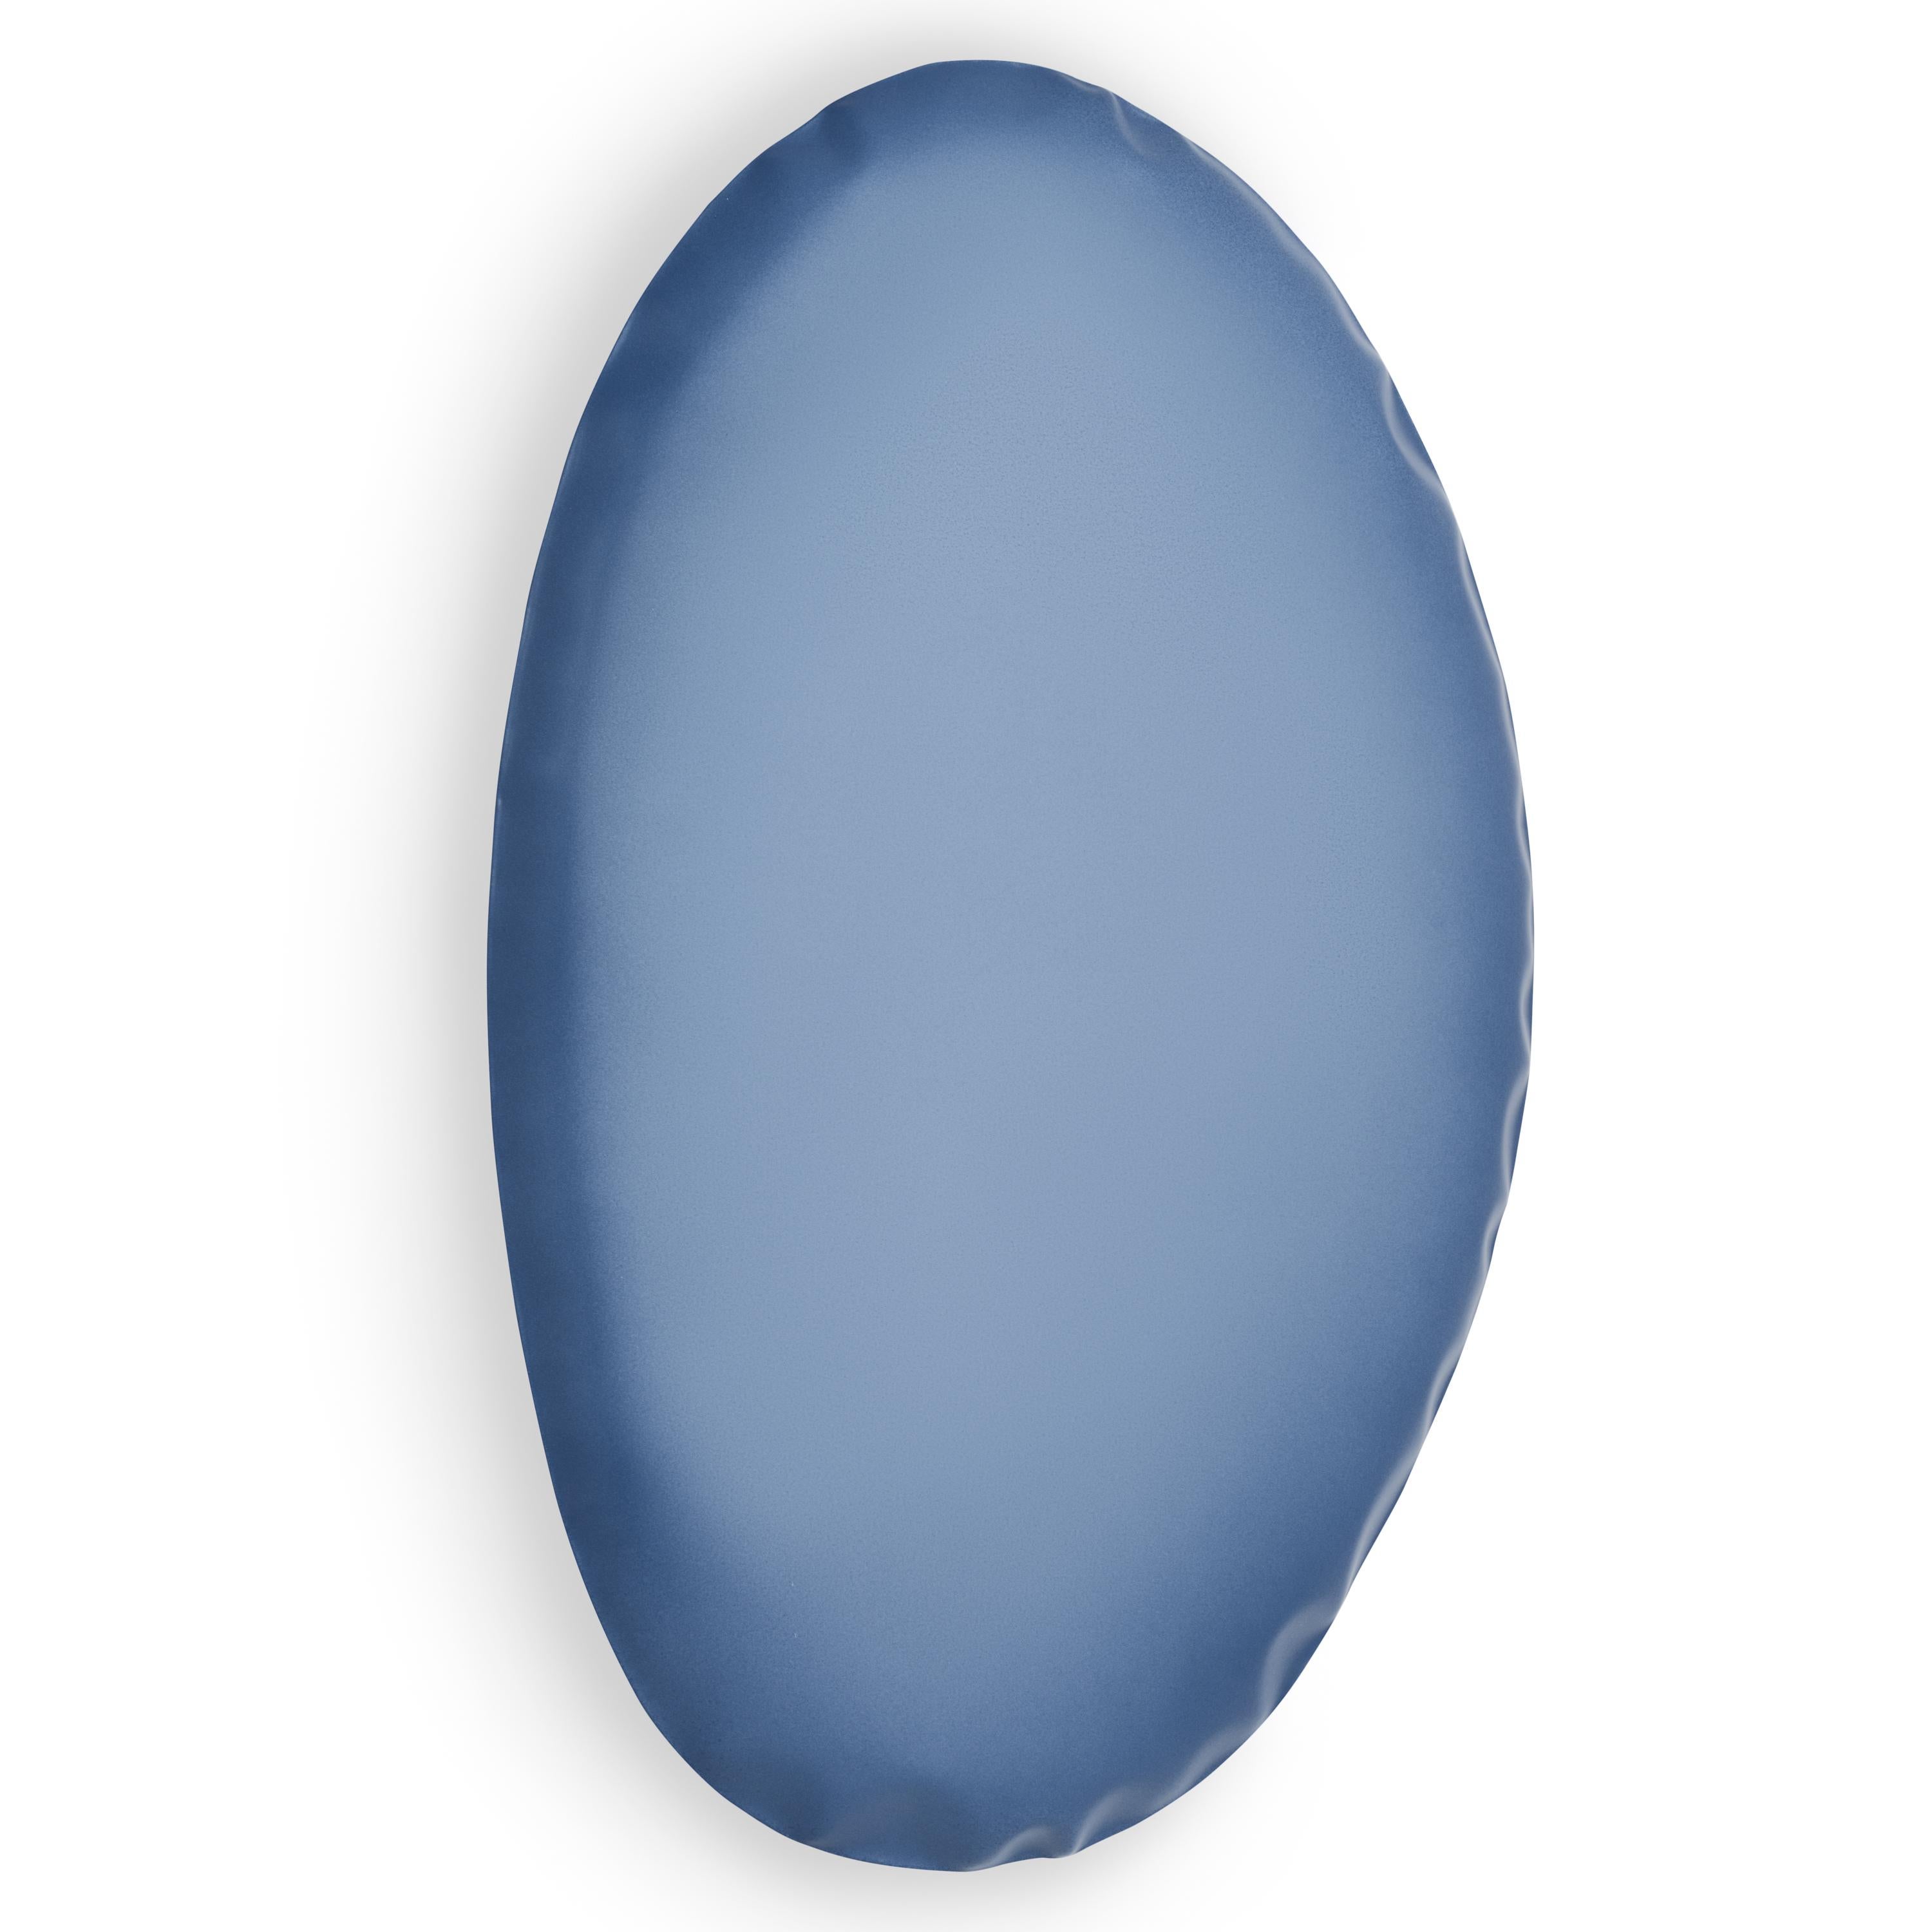 Blue Matt Tafla O5 Wall Mirror by Zieta
Dimensions: D6 x W40 x H60 cm 
Material: steel
Available finishes: Also available in other sizes and colours.Please contact us.

Soft steel impressions
Challenging the material is one of the fundamental